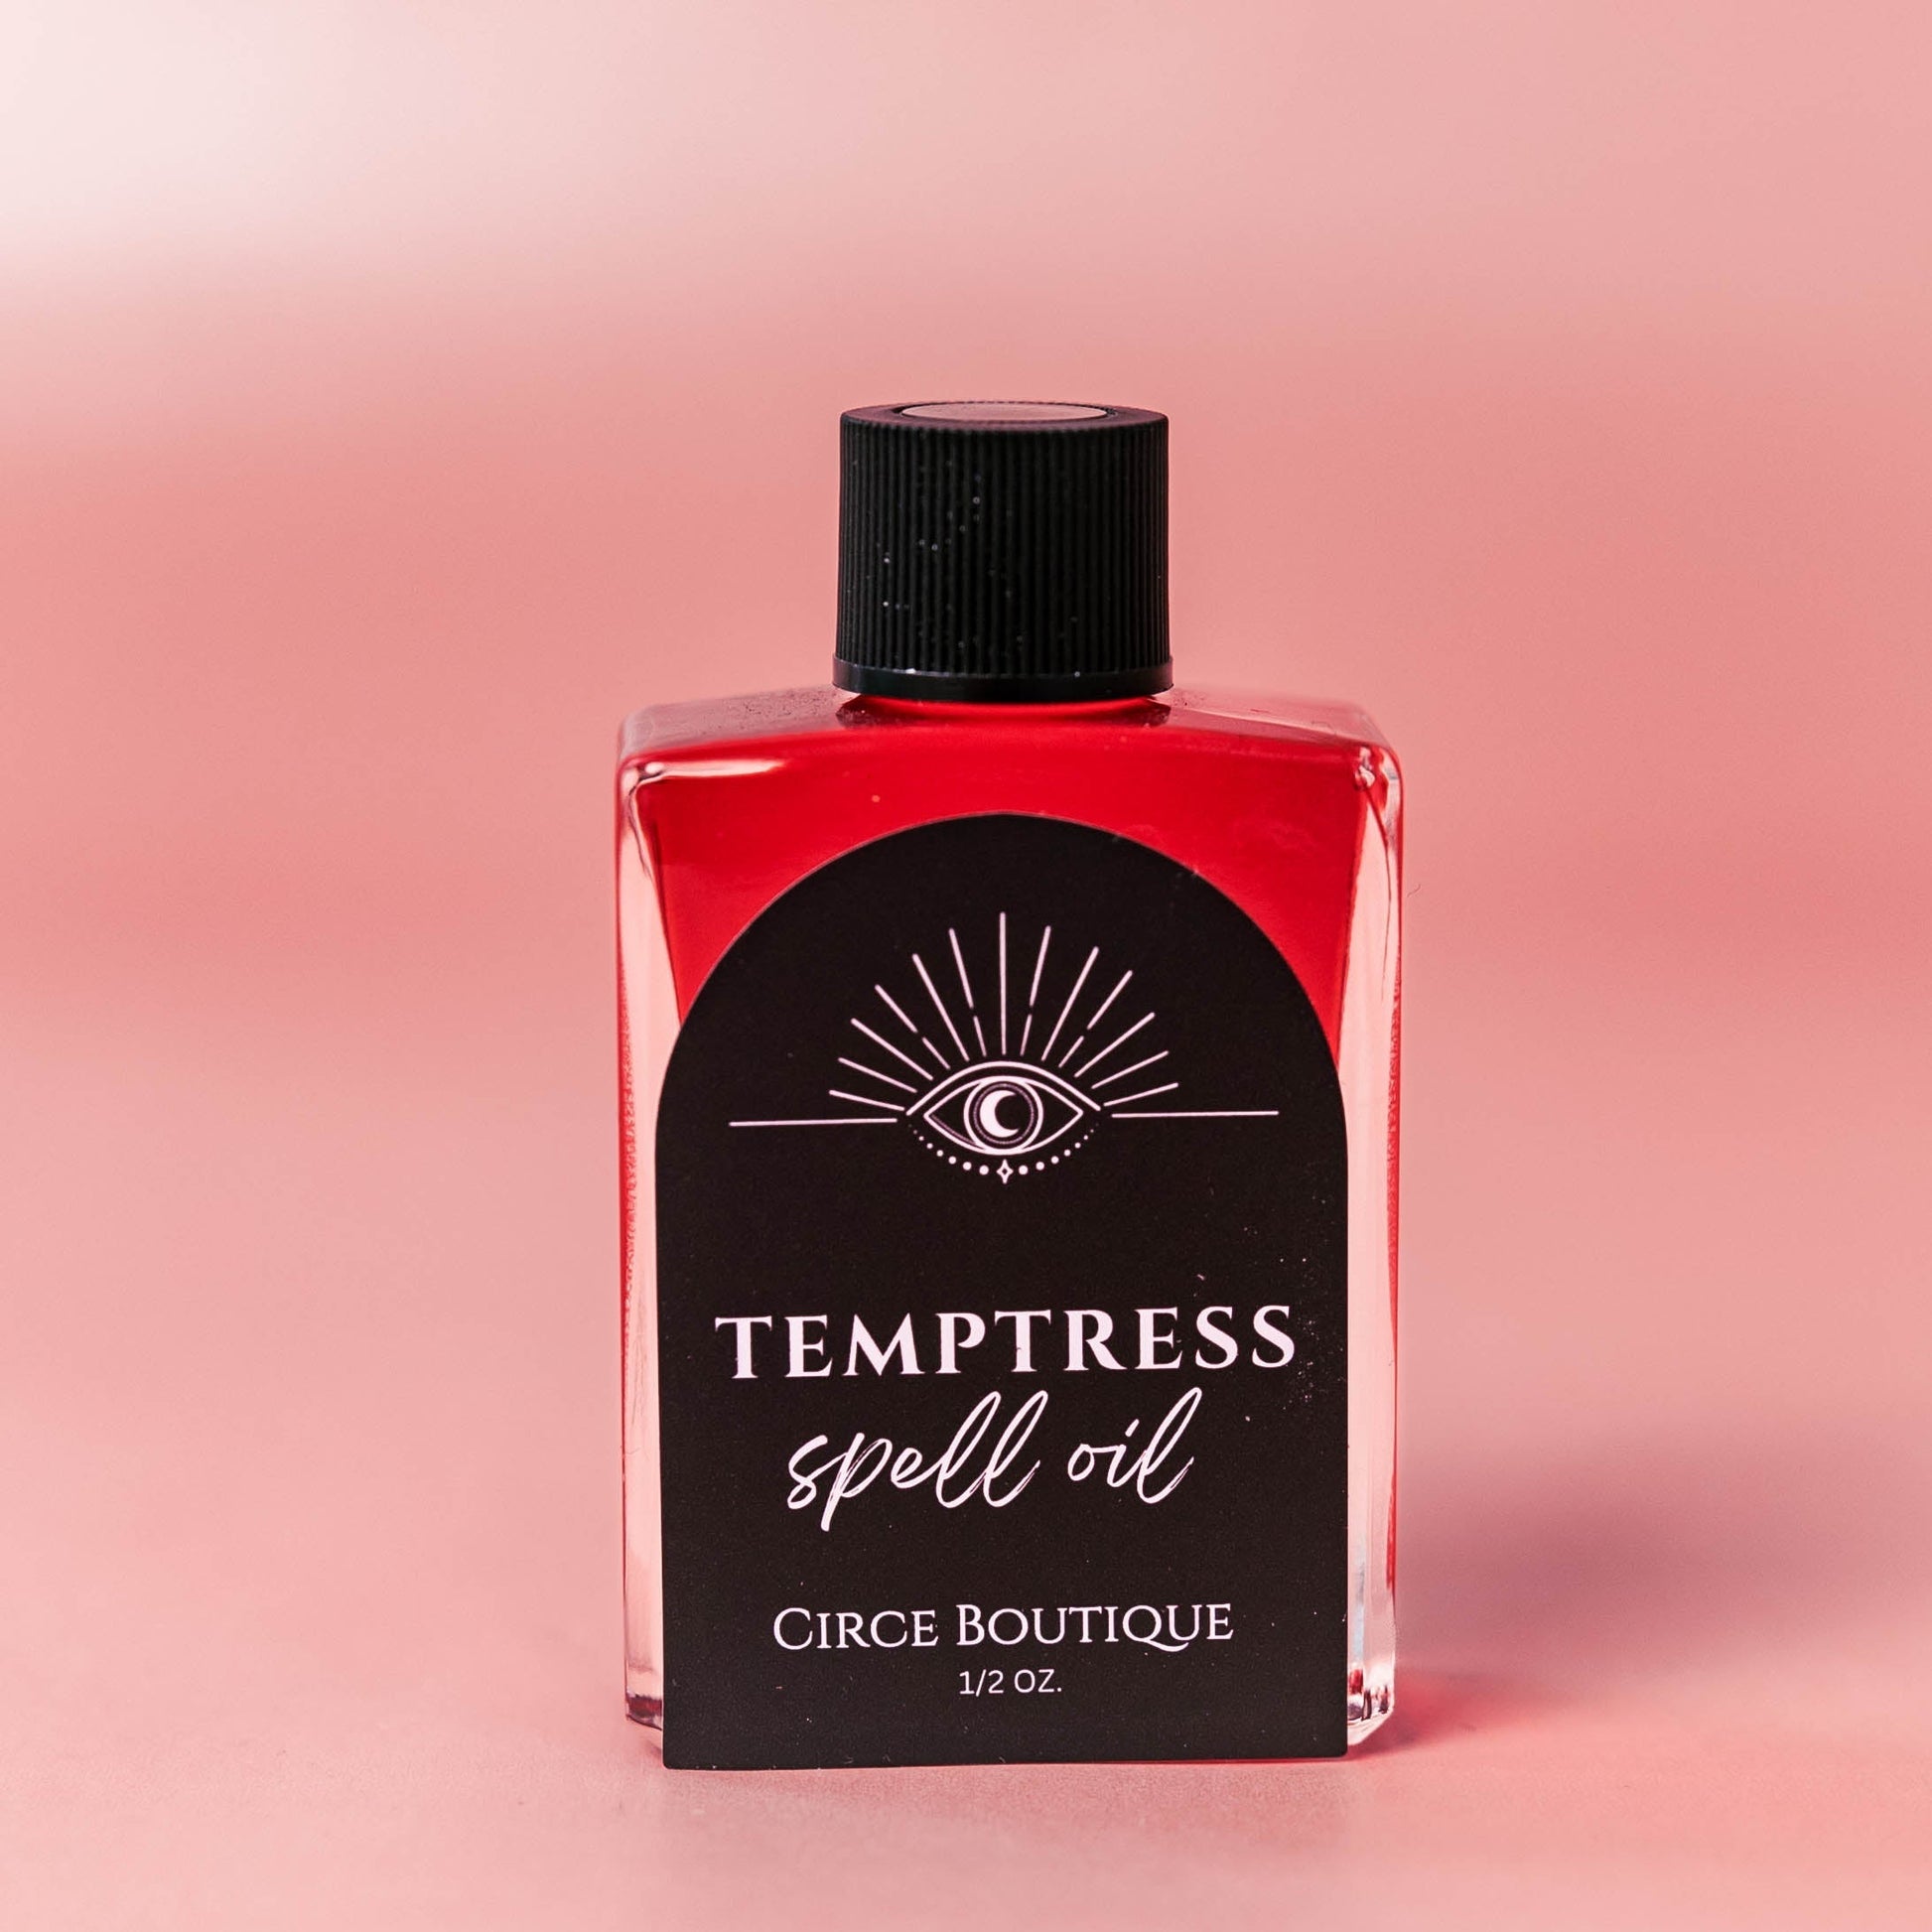 CIRCE Temptress Spell Oil 1/2 oz. - Oil  from CirceBoutique